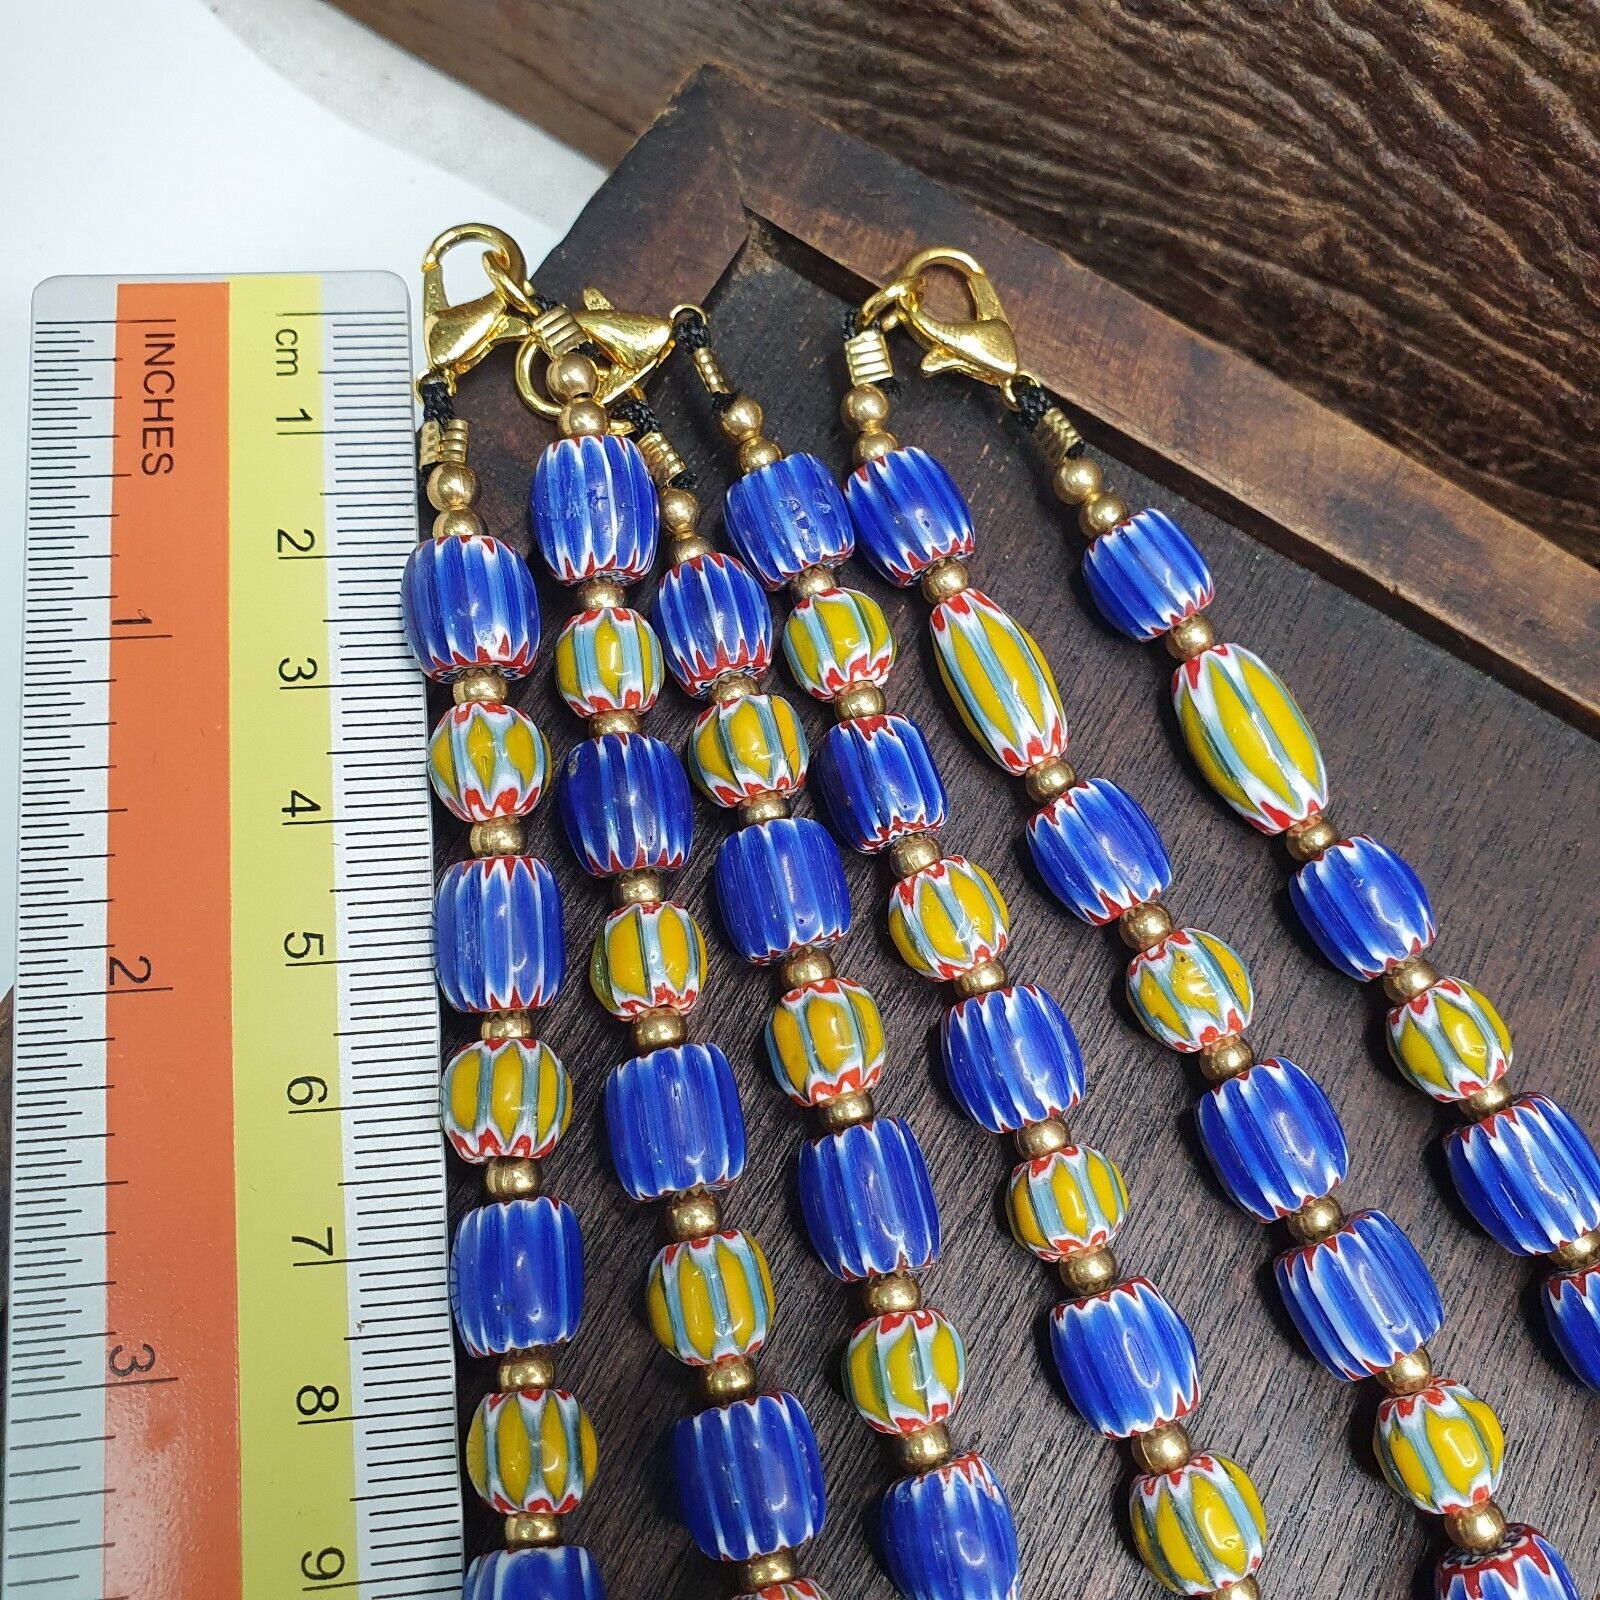 Vintage Old Blue, yellow Chevron Trade beads Old African Glass Beads Necklace